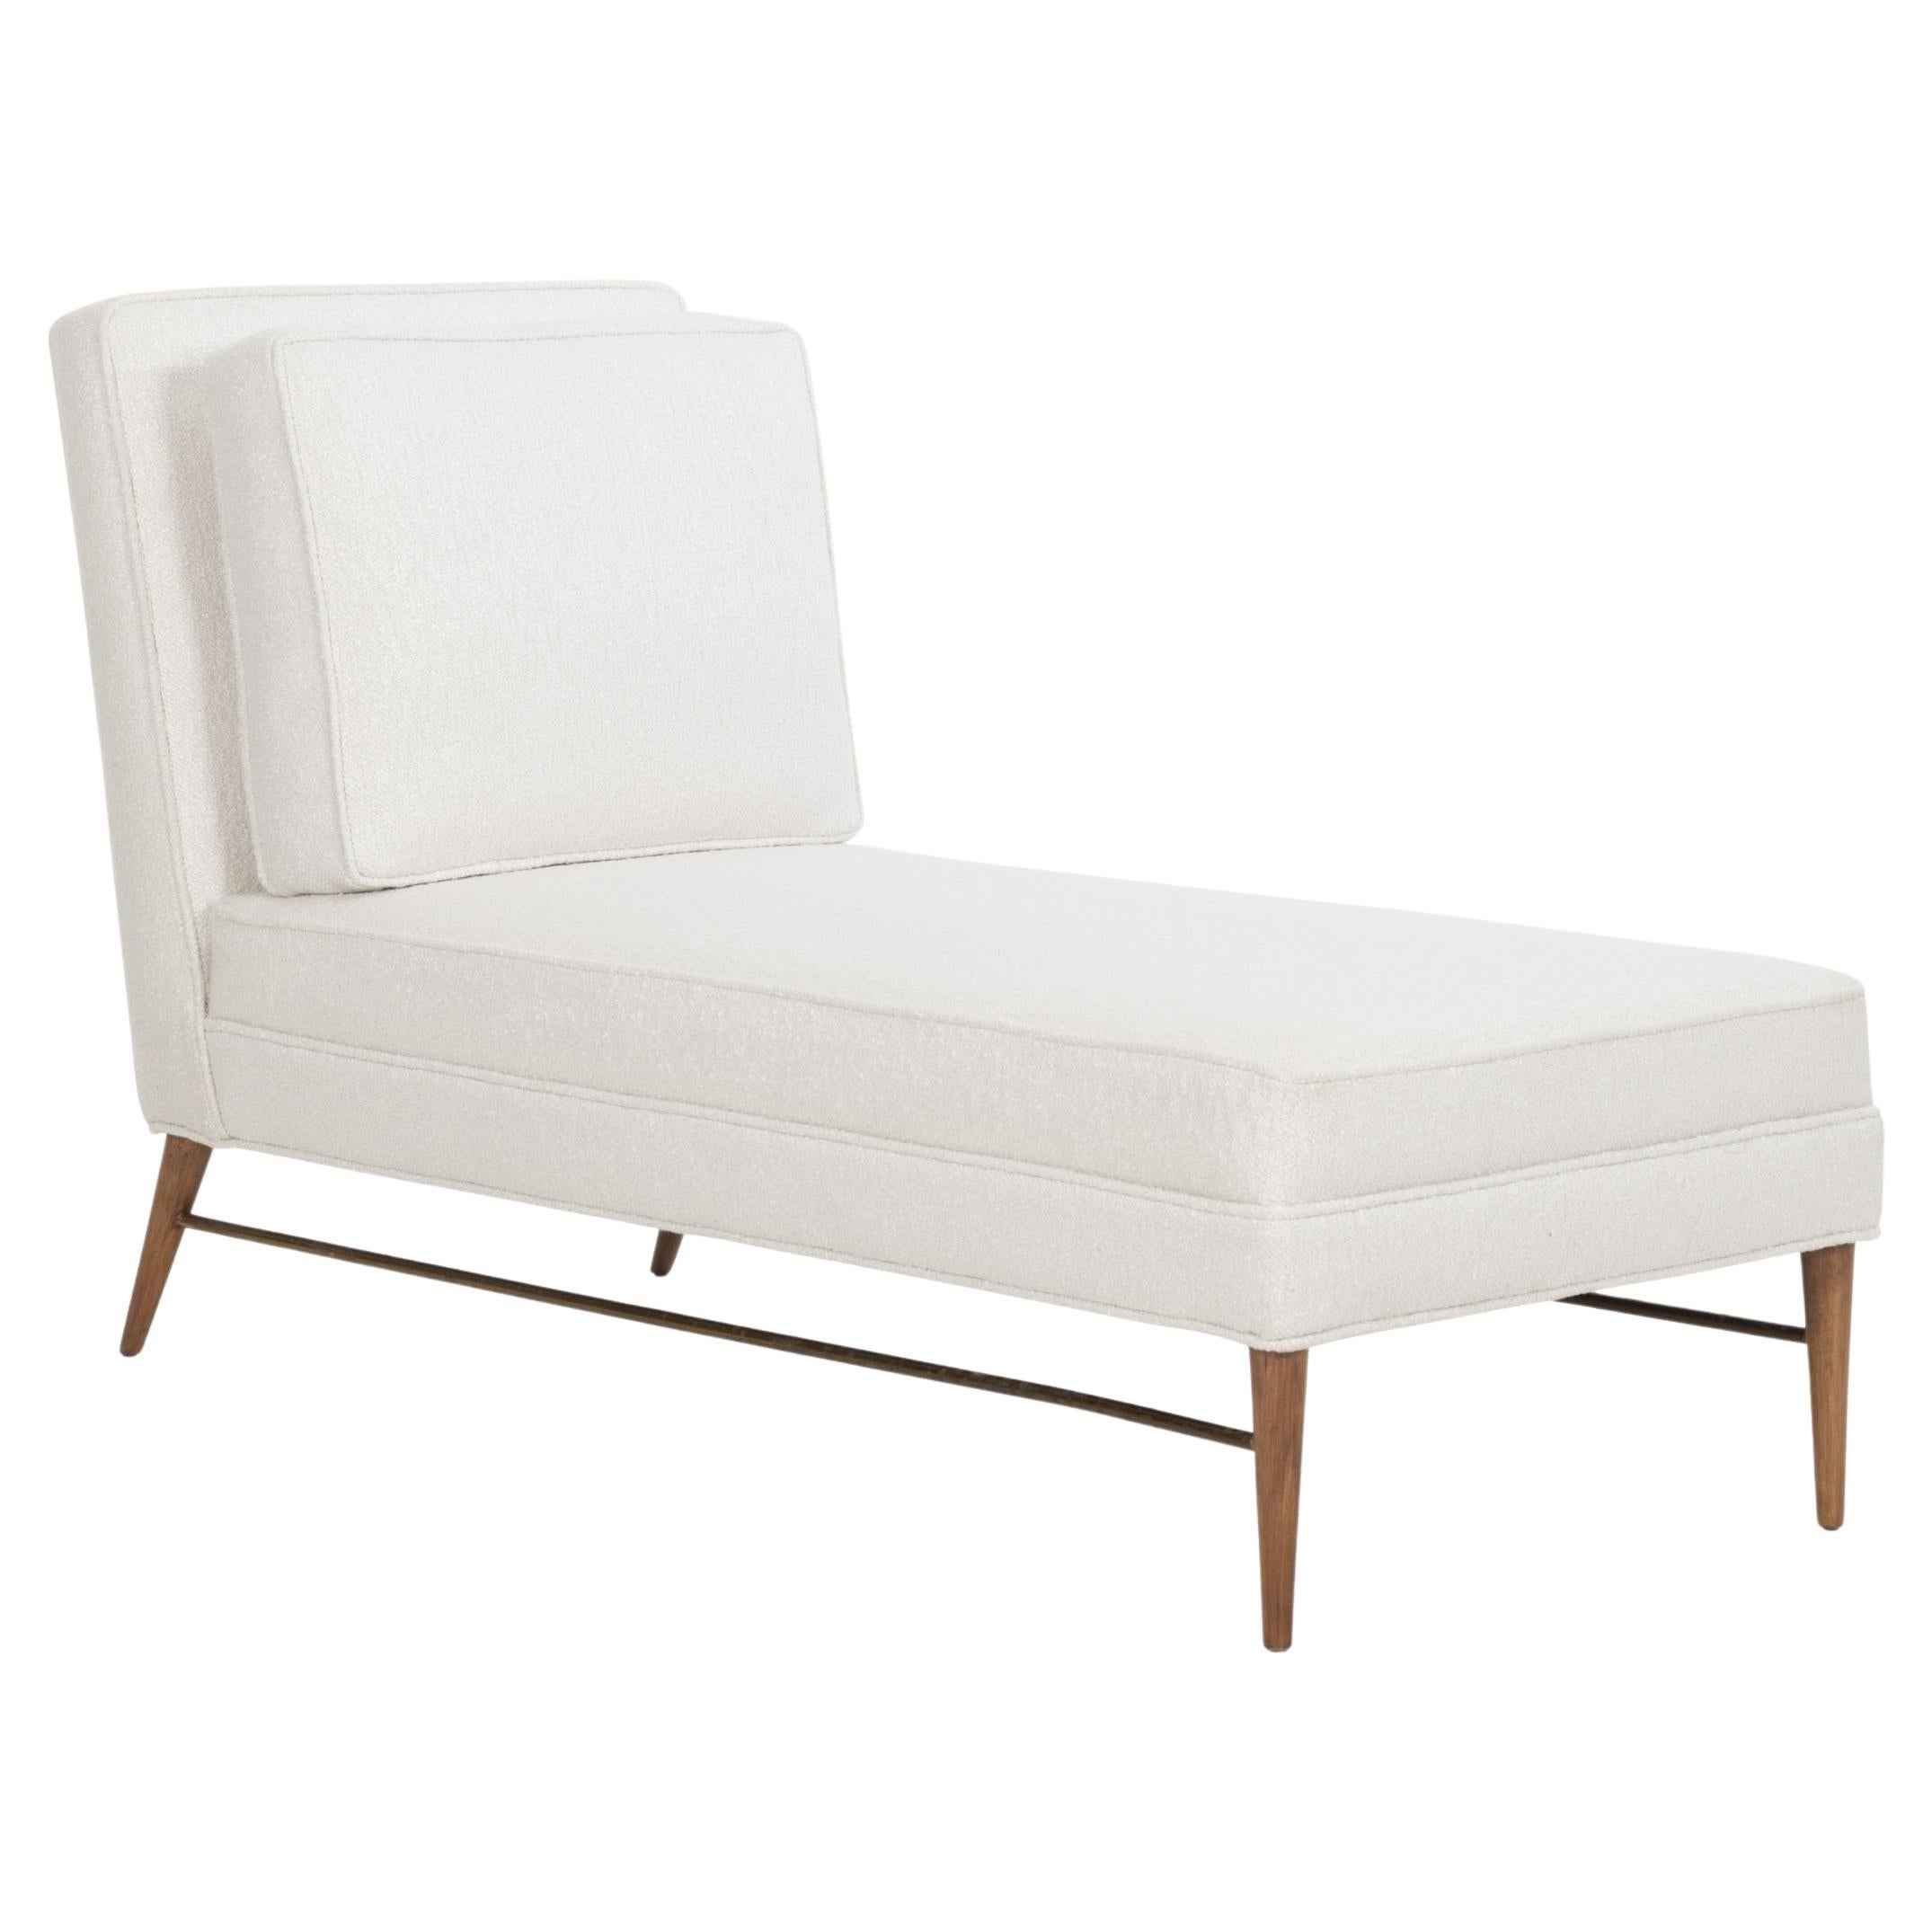 Paul McCobb Chaise Lounge, for Directional Model 5018 For Sale at 1stDibs